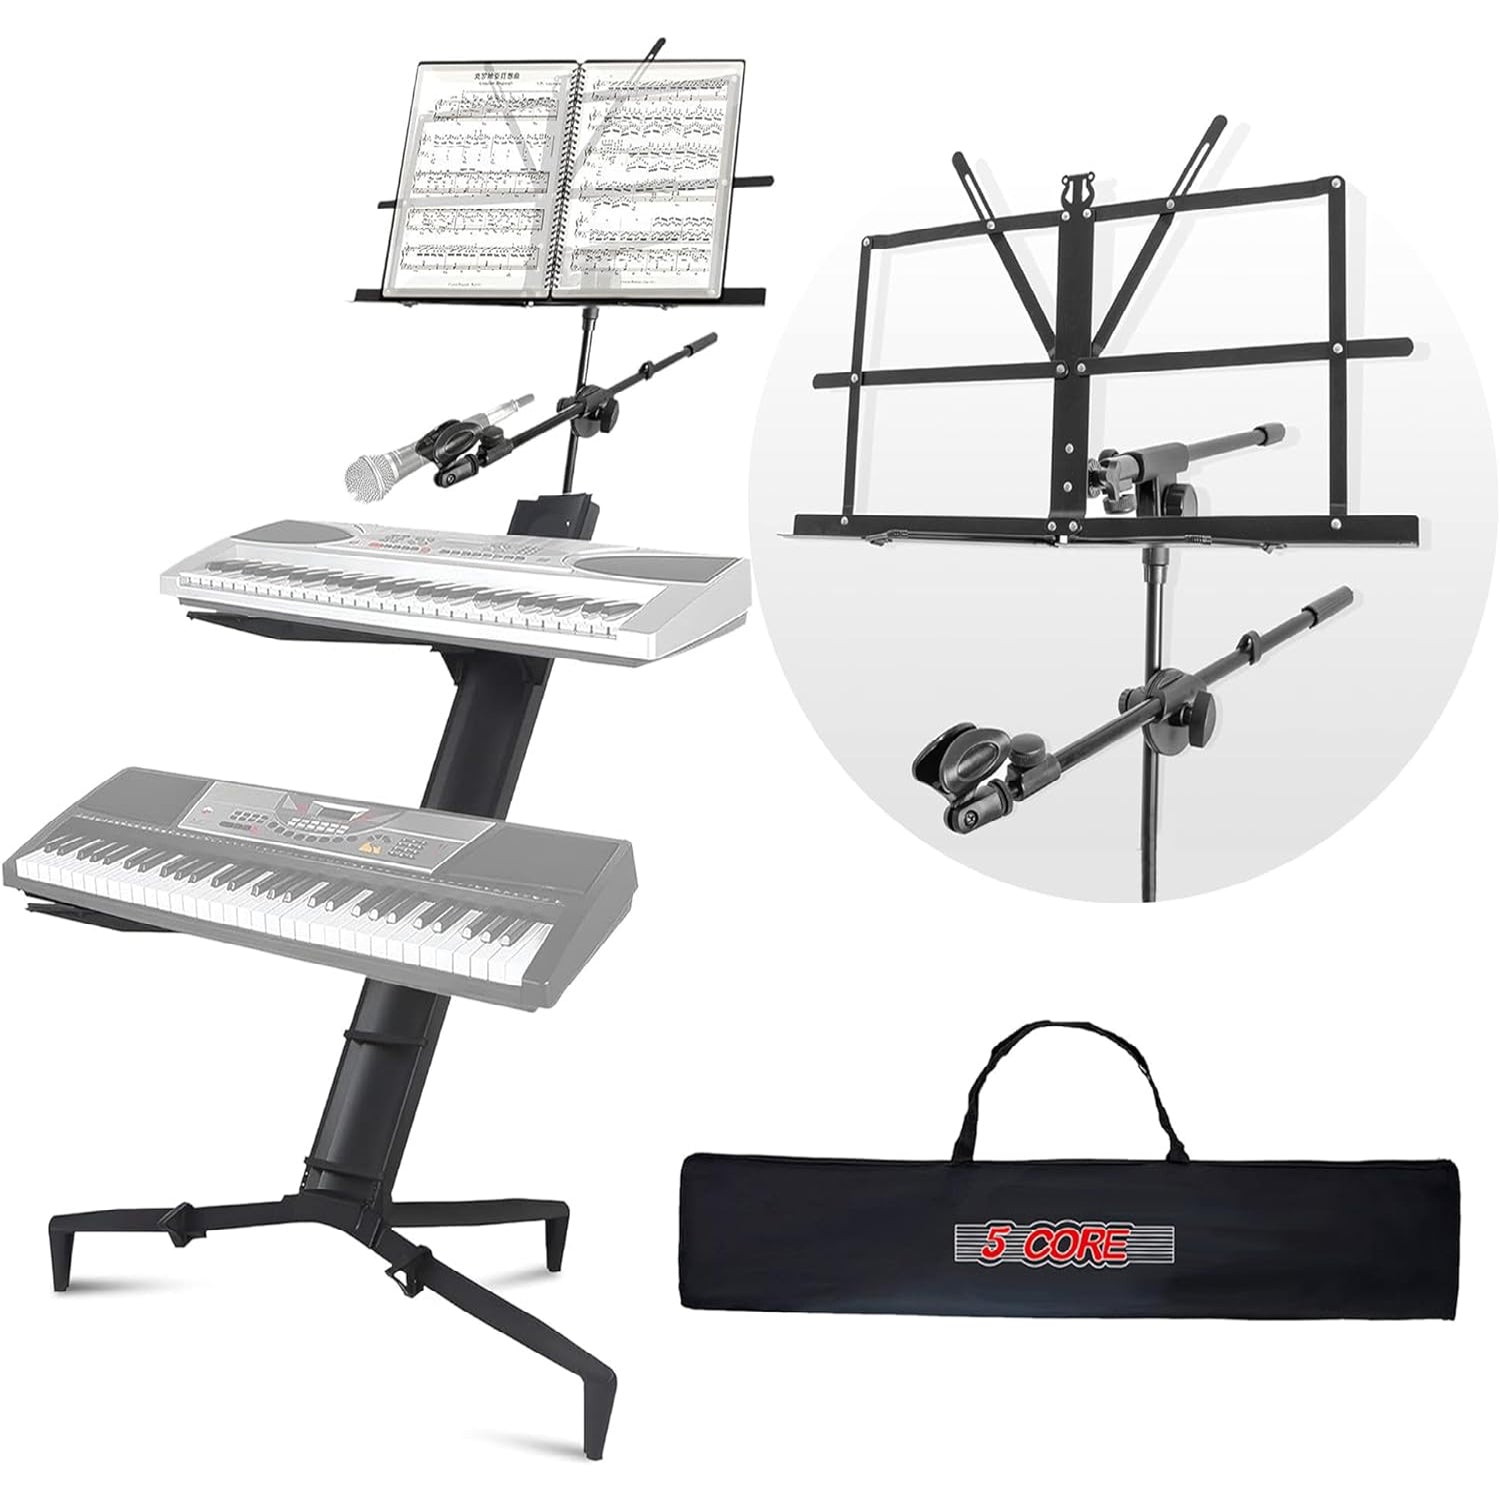 5 Core Keyboard Stand Riser 2 Tier Classic Keyboard Piano Holder Lift Adjustable Two Stage Tower Rack